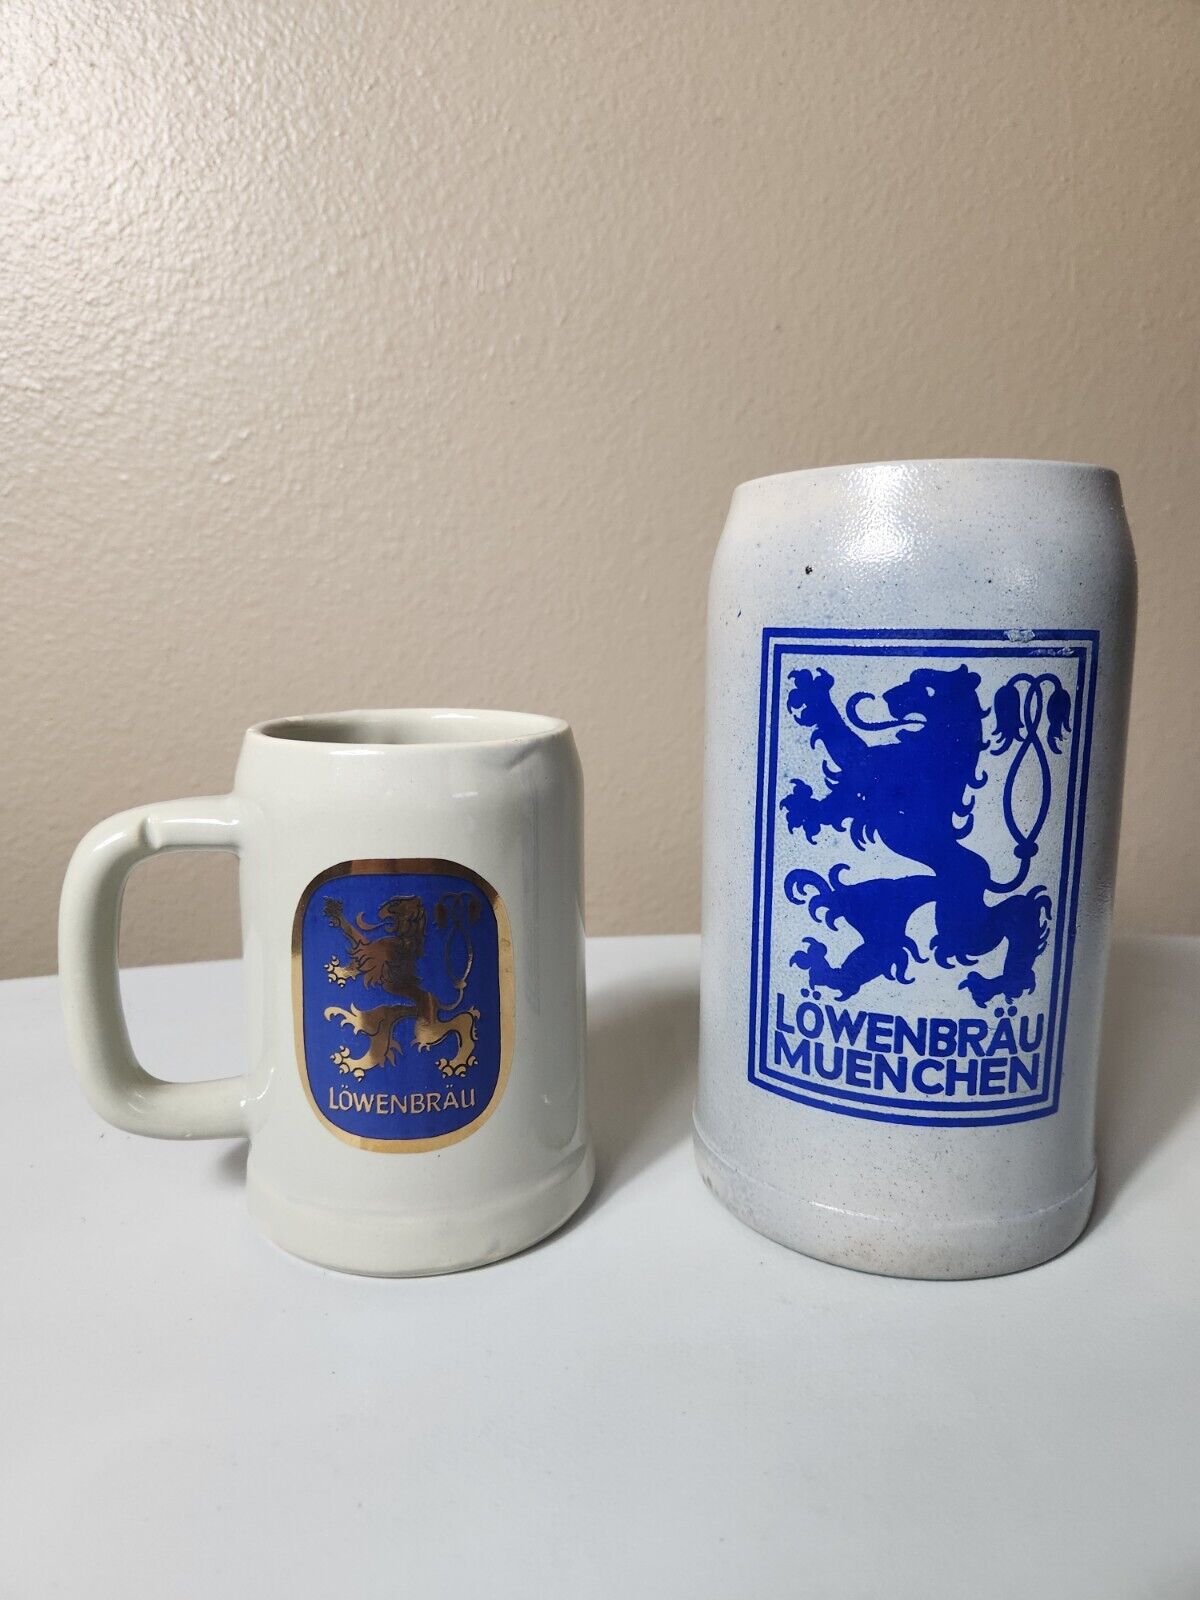 Lowenbrau Muenchen VTG Beer Collectible Steins-Lot of 2